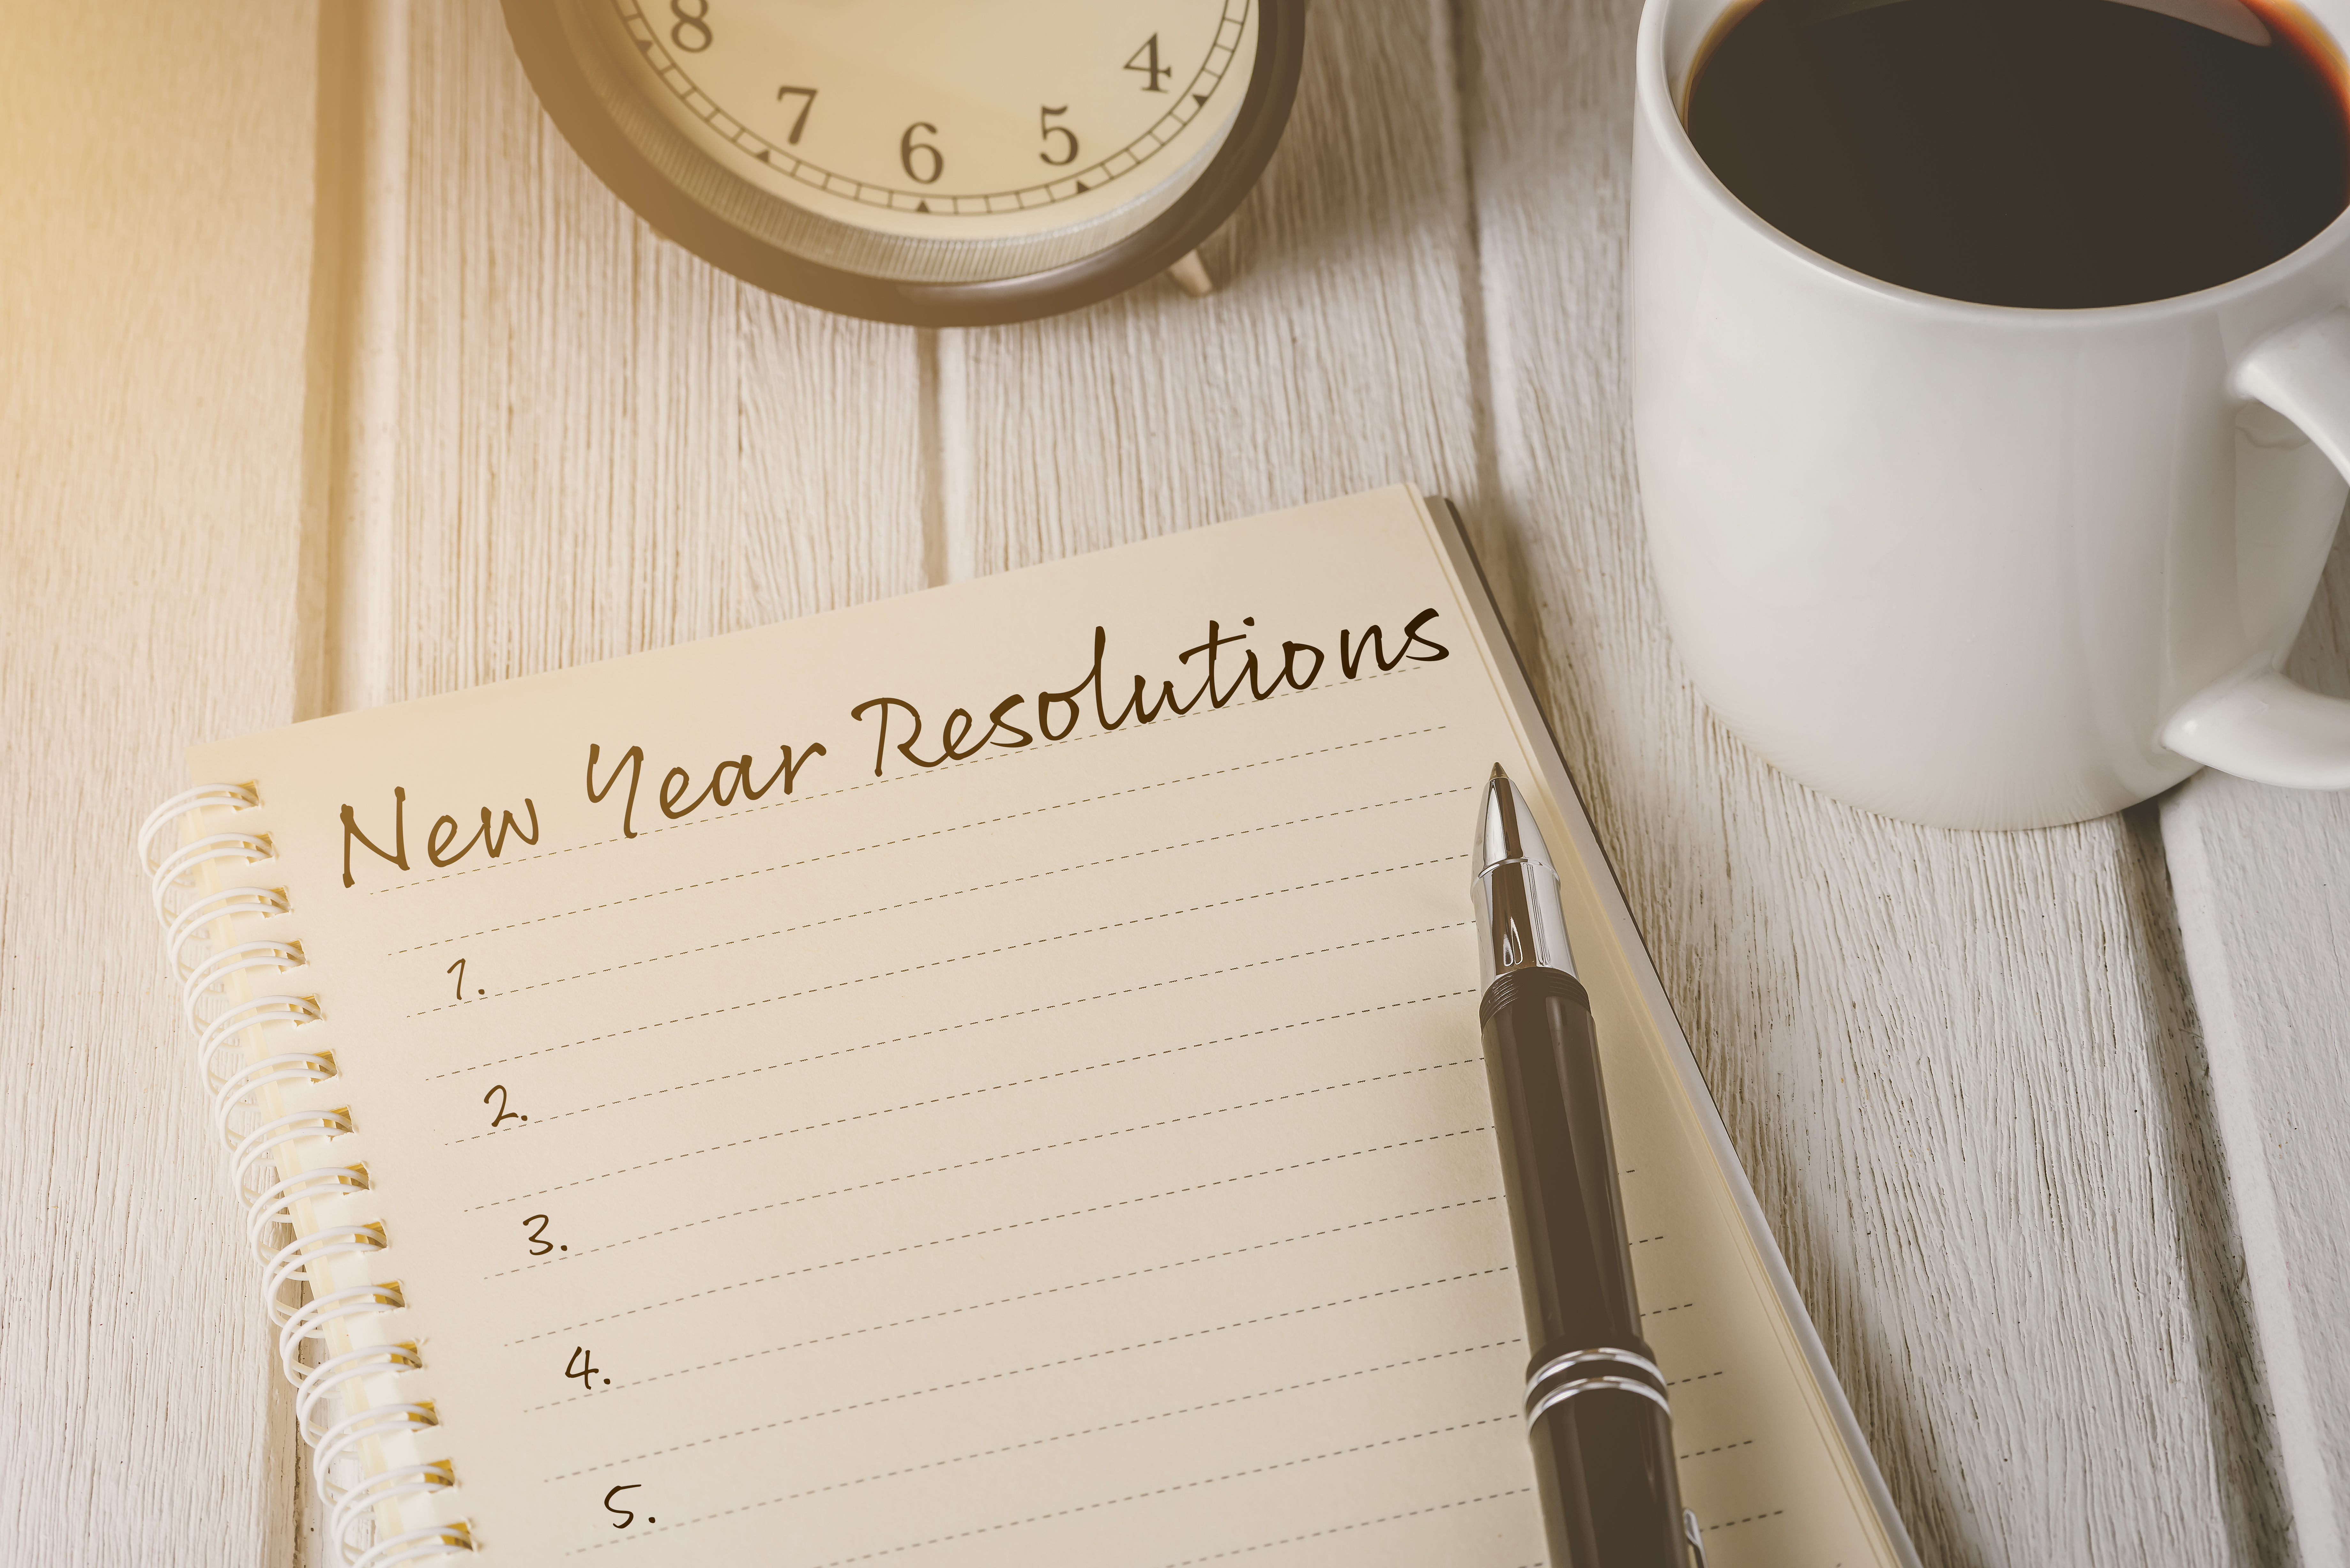 22 Resolutions for Accounting Professionals in 2022